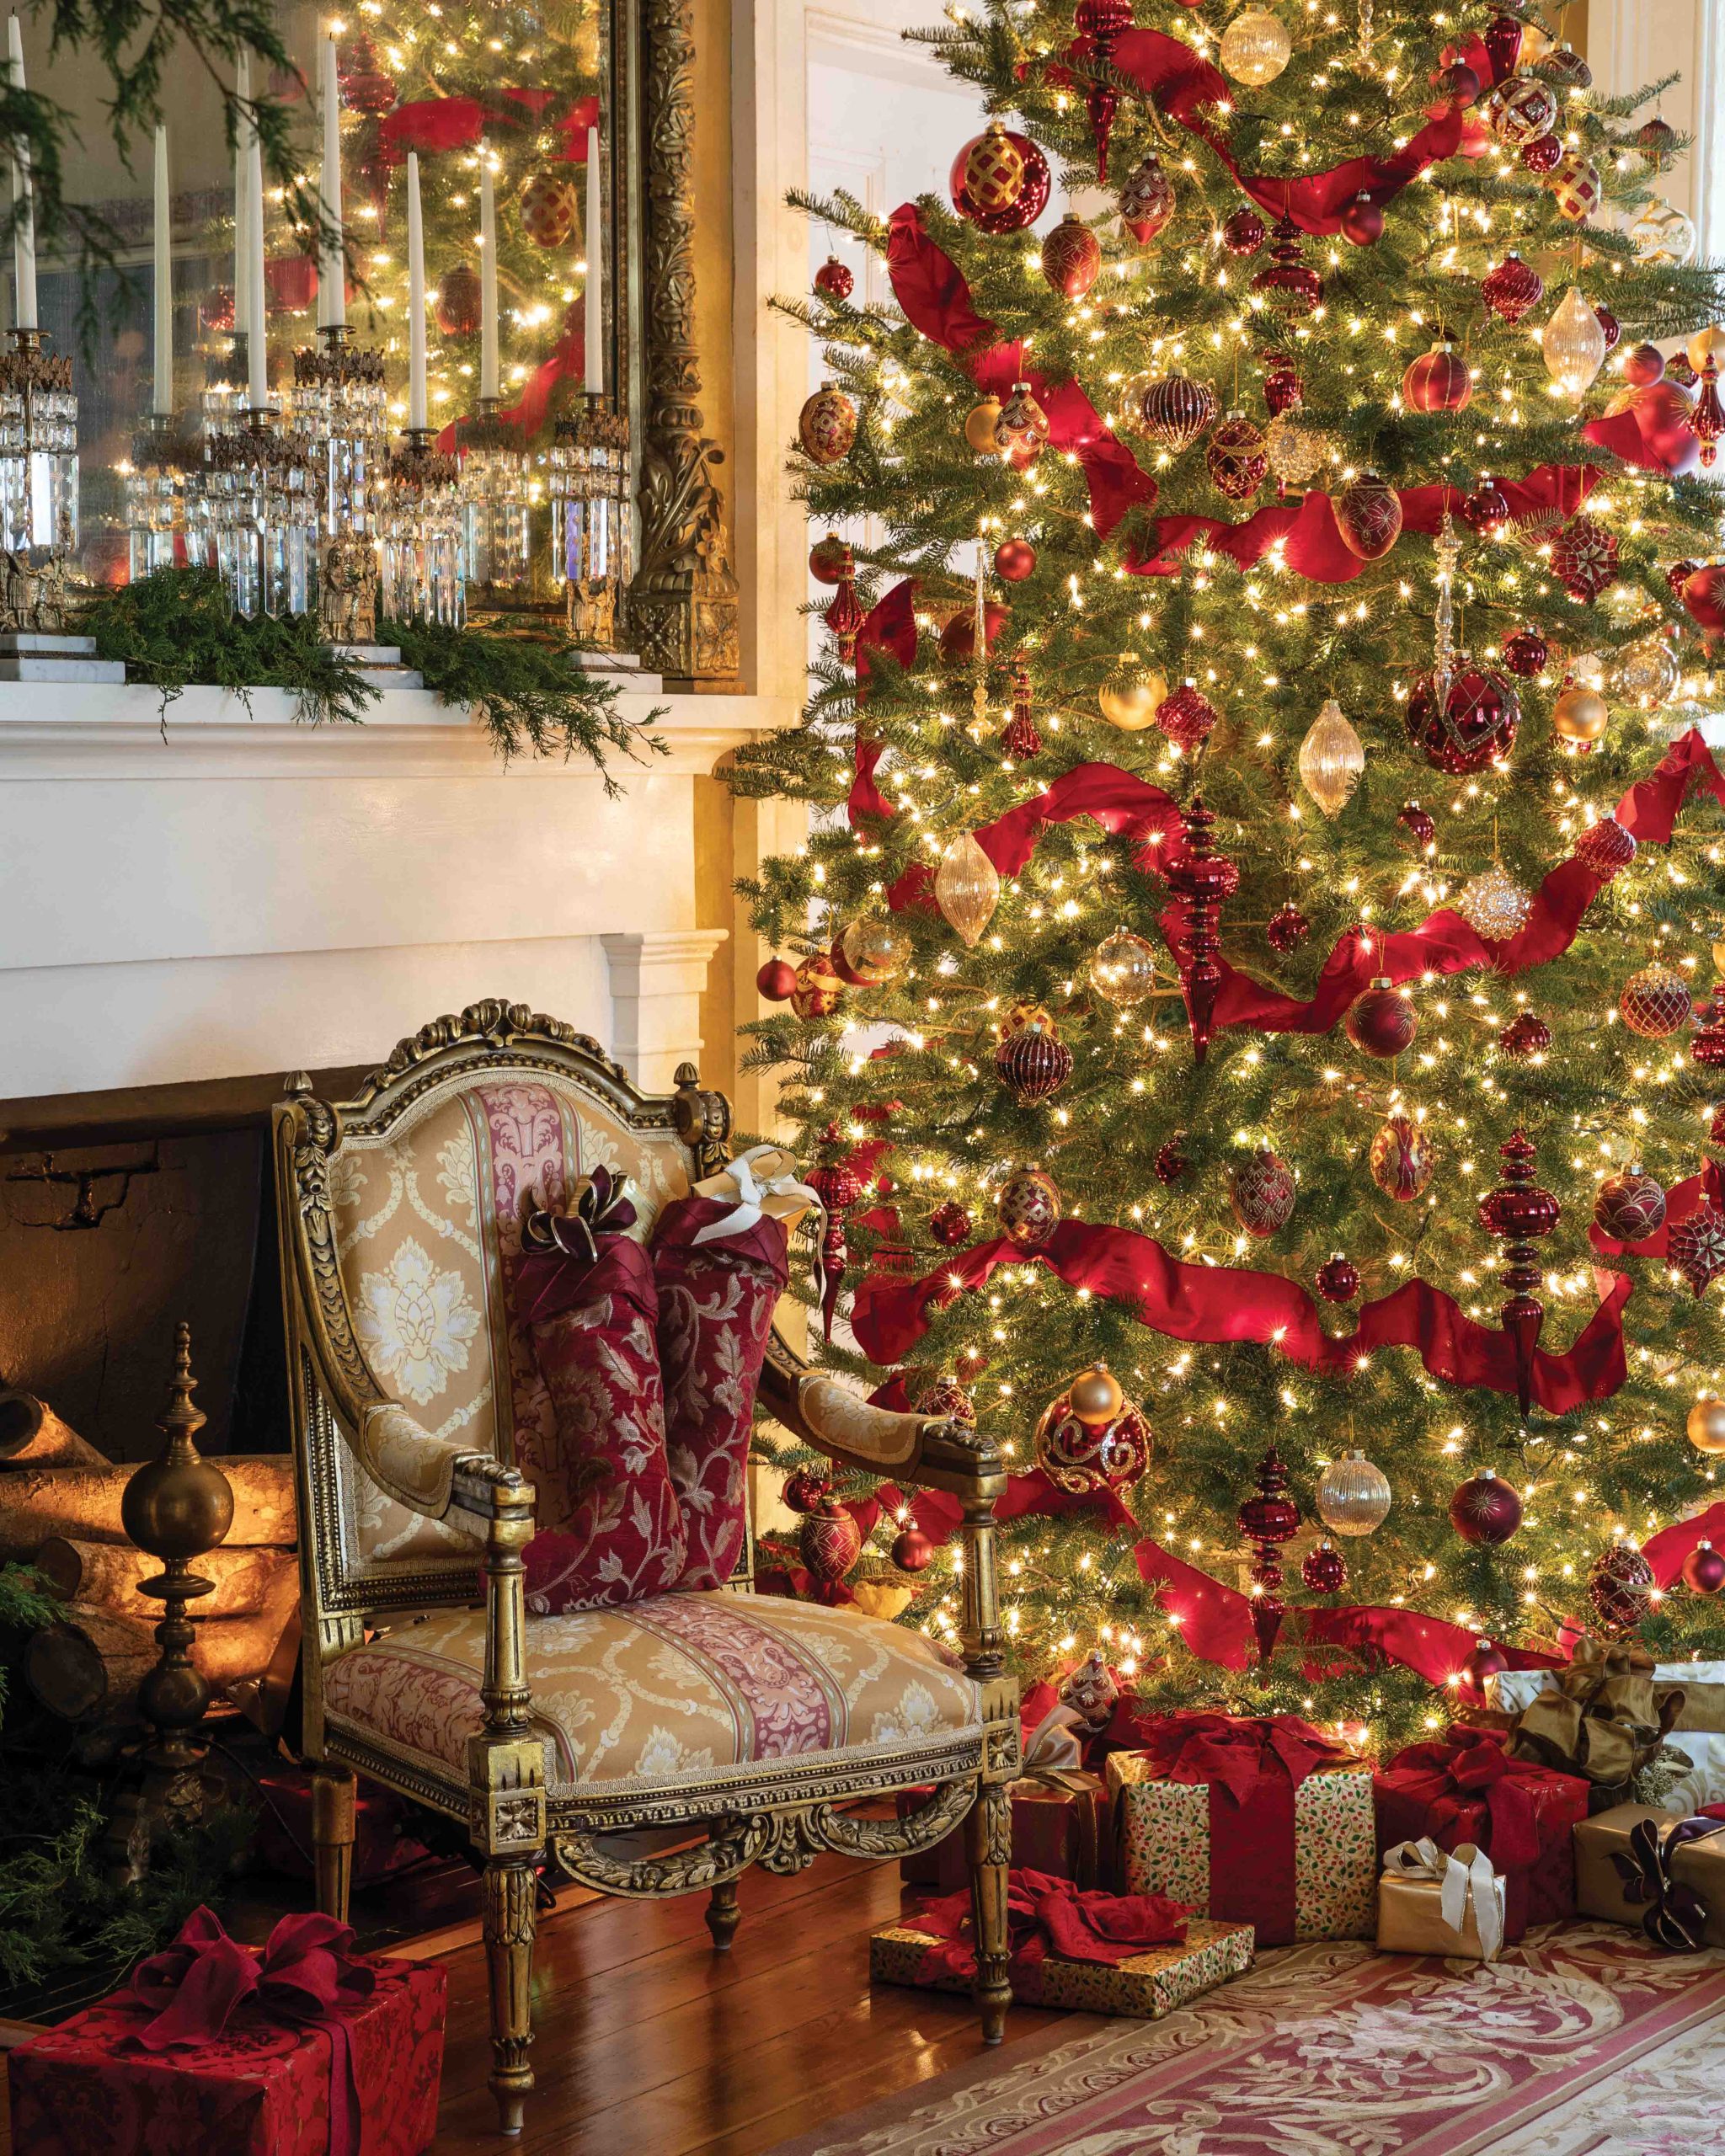 Red ribbons wrap around a regal Christmas tree dotted with gold and crimson hand-blown ornaments. The tree stands proud beside an antique French chair set before the hearth.